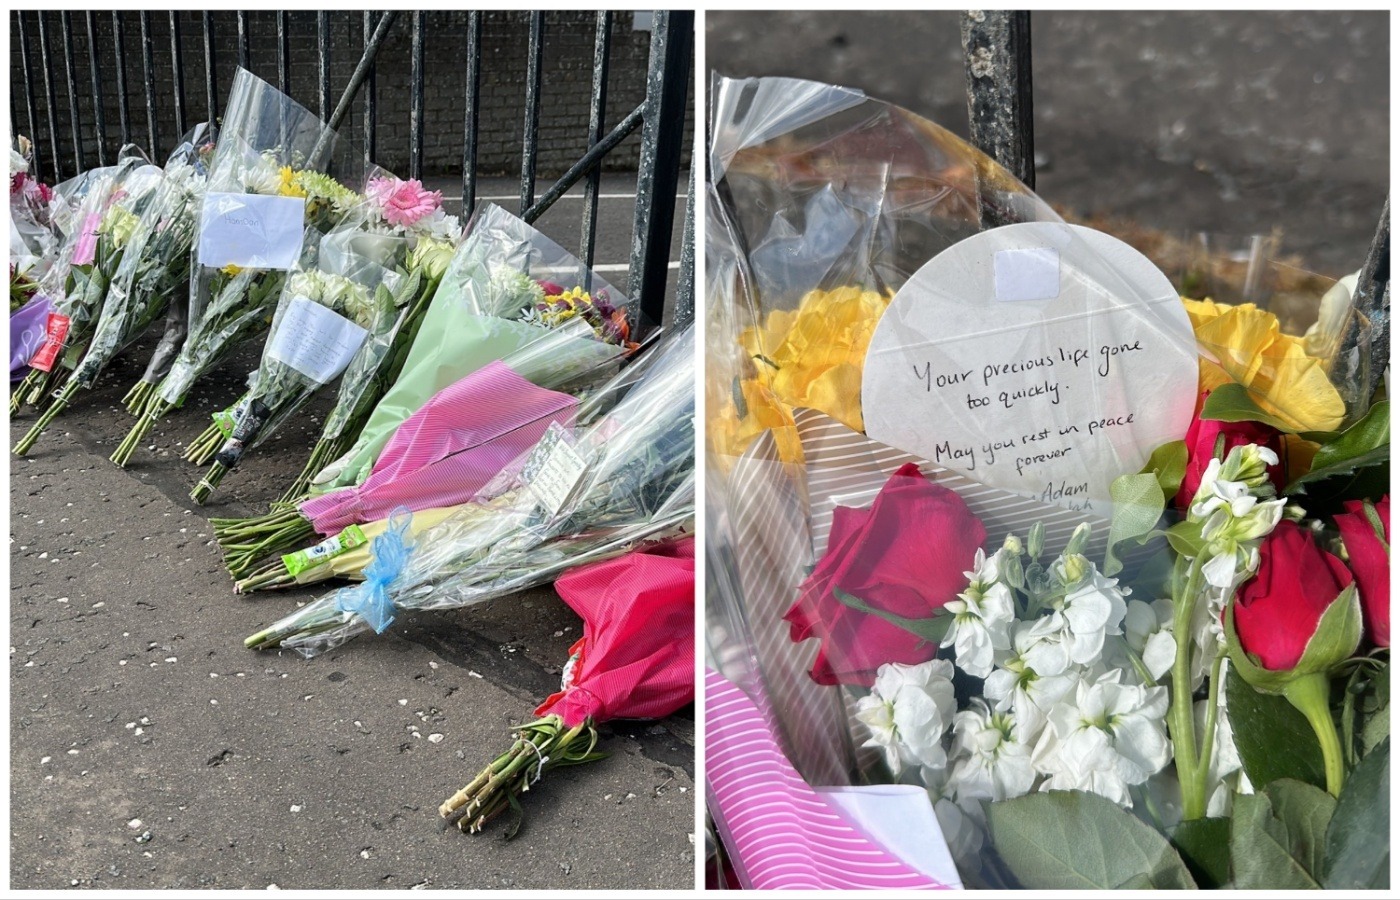 Floral tributes have been paid outside St Kentigern's Academy.